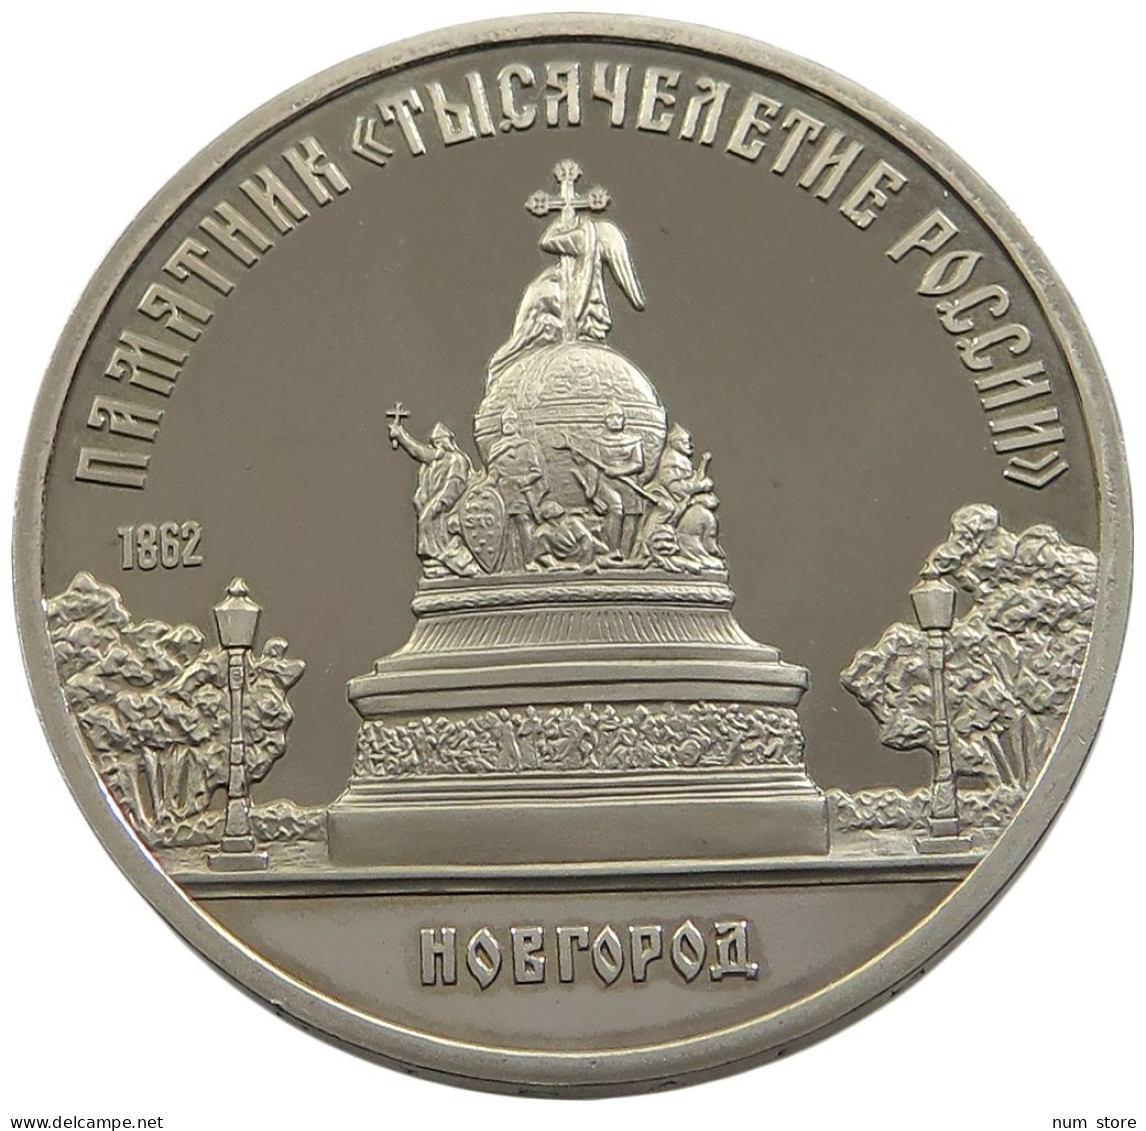 RUSSIA USSR 5 ROUBLES 1988 PROOF #sm14 0853 - Russland